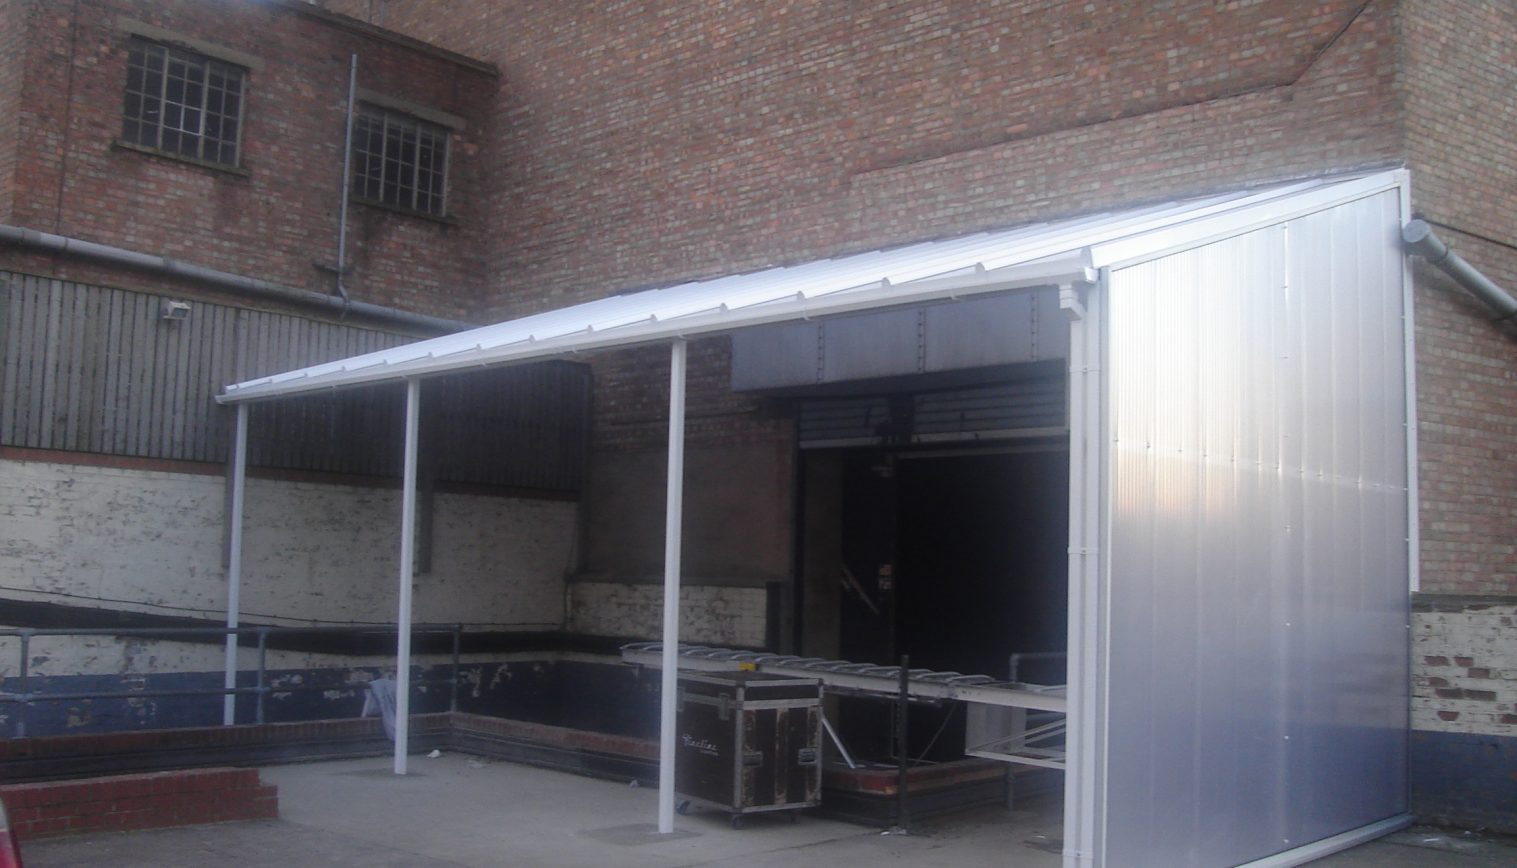 Regent Theatre – Wall Mounted Canopy